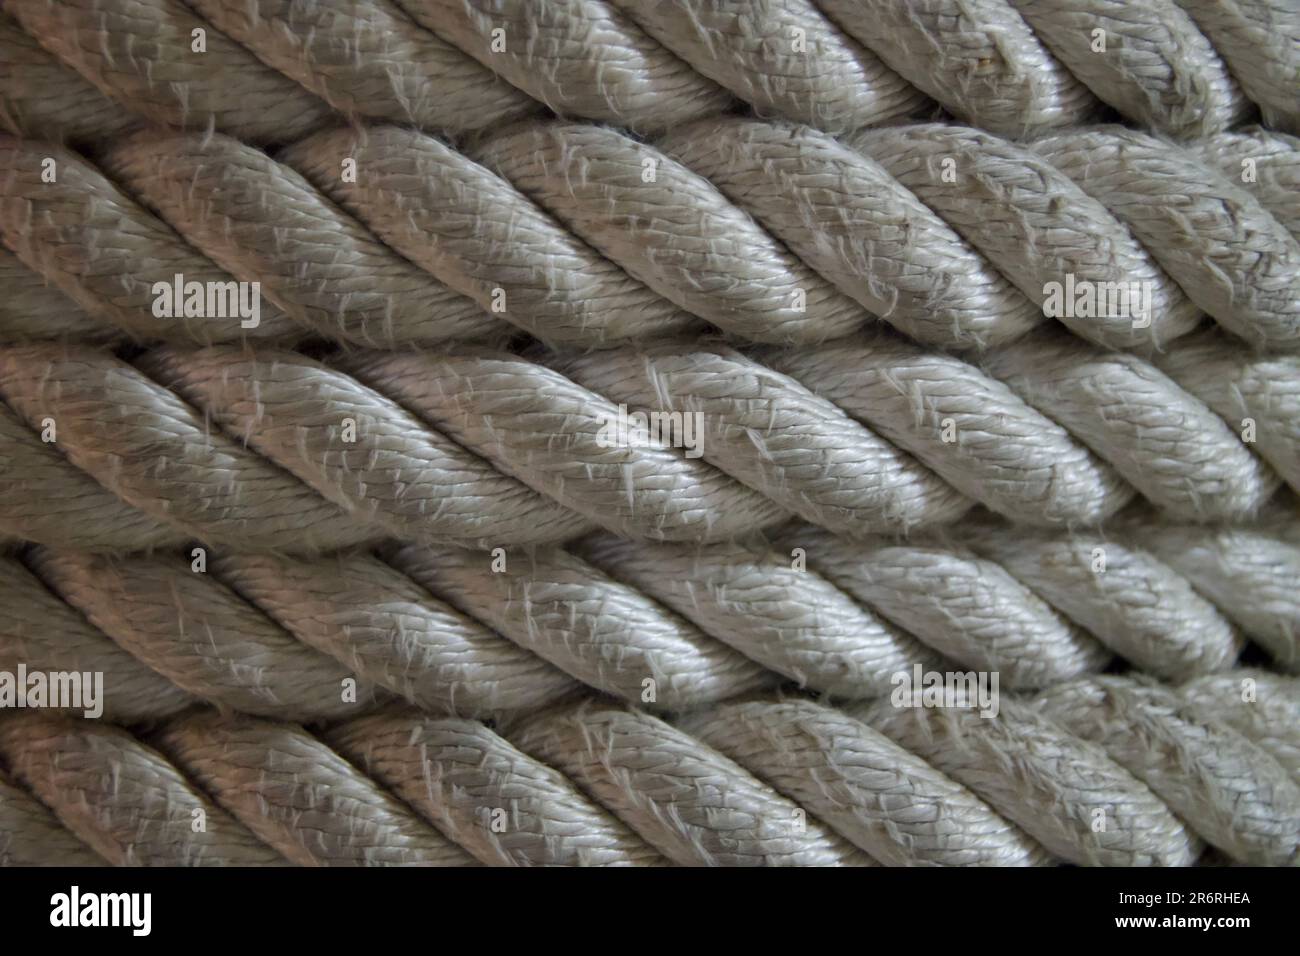 A close-up image of a multi-colored rope featuring various hues of yarn woven together Stock Photo